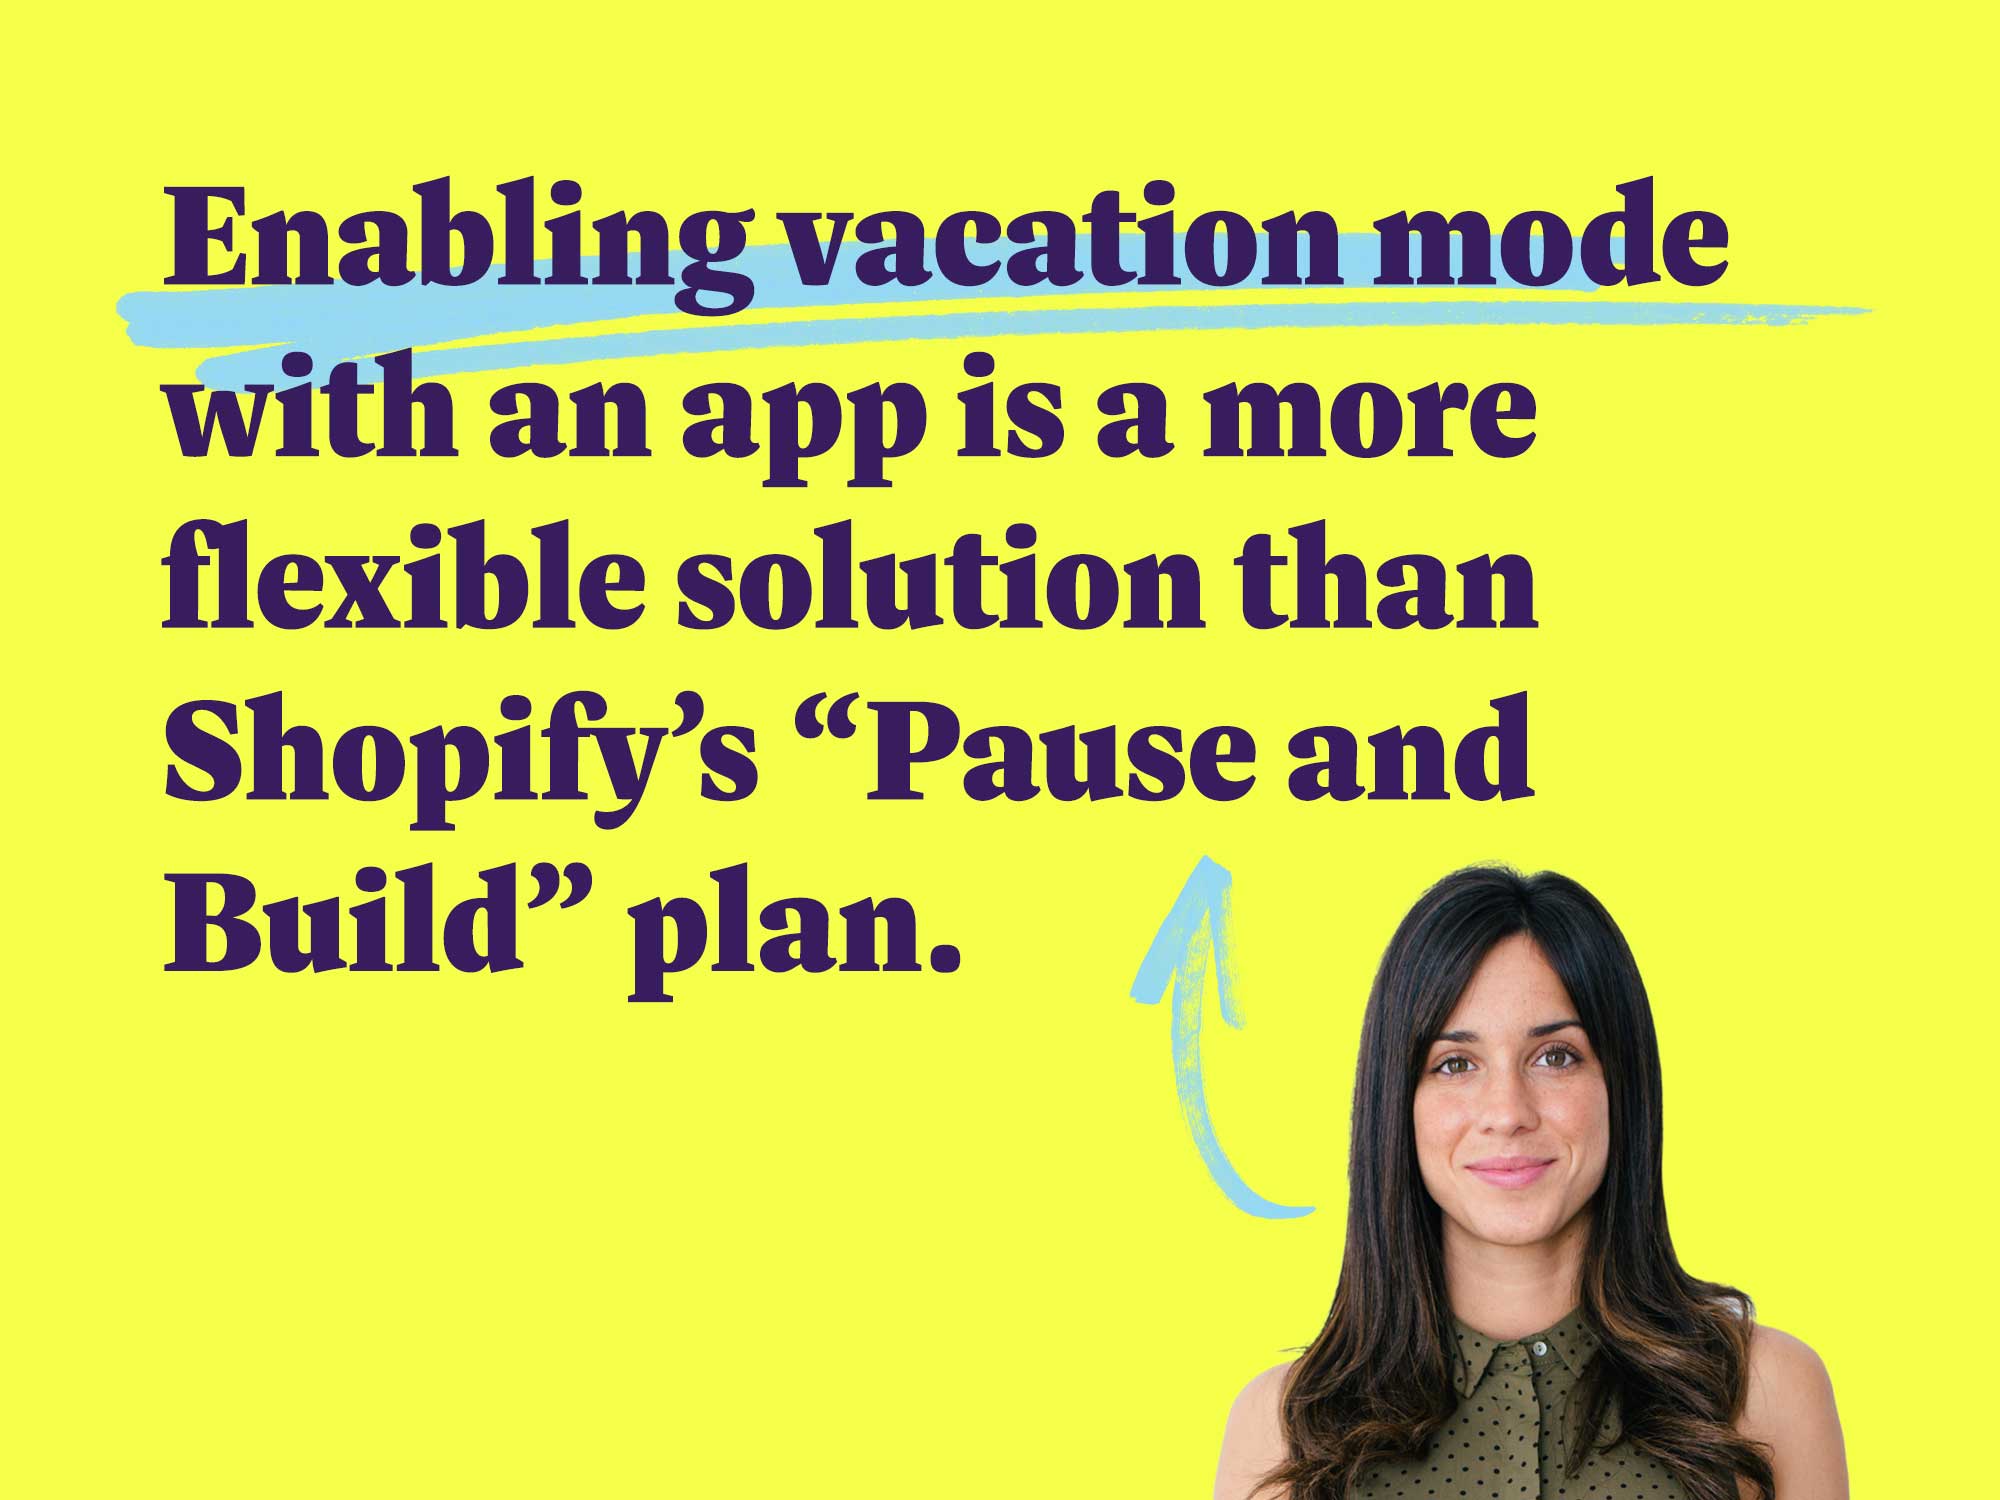 Enabling vacation mode with an app is a more flexible solution than Shopify’s “Pause and Build” plan.